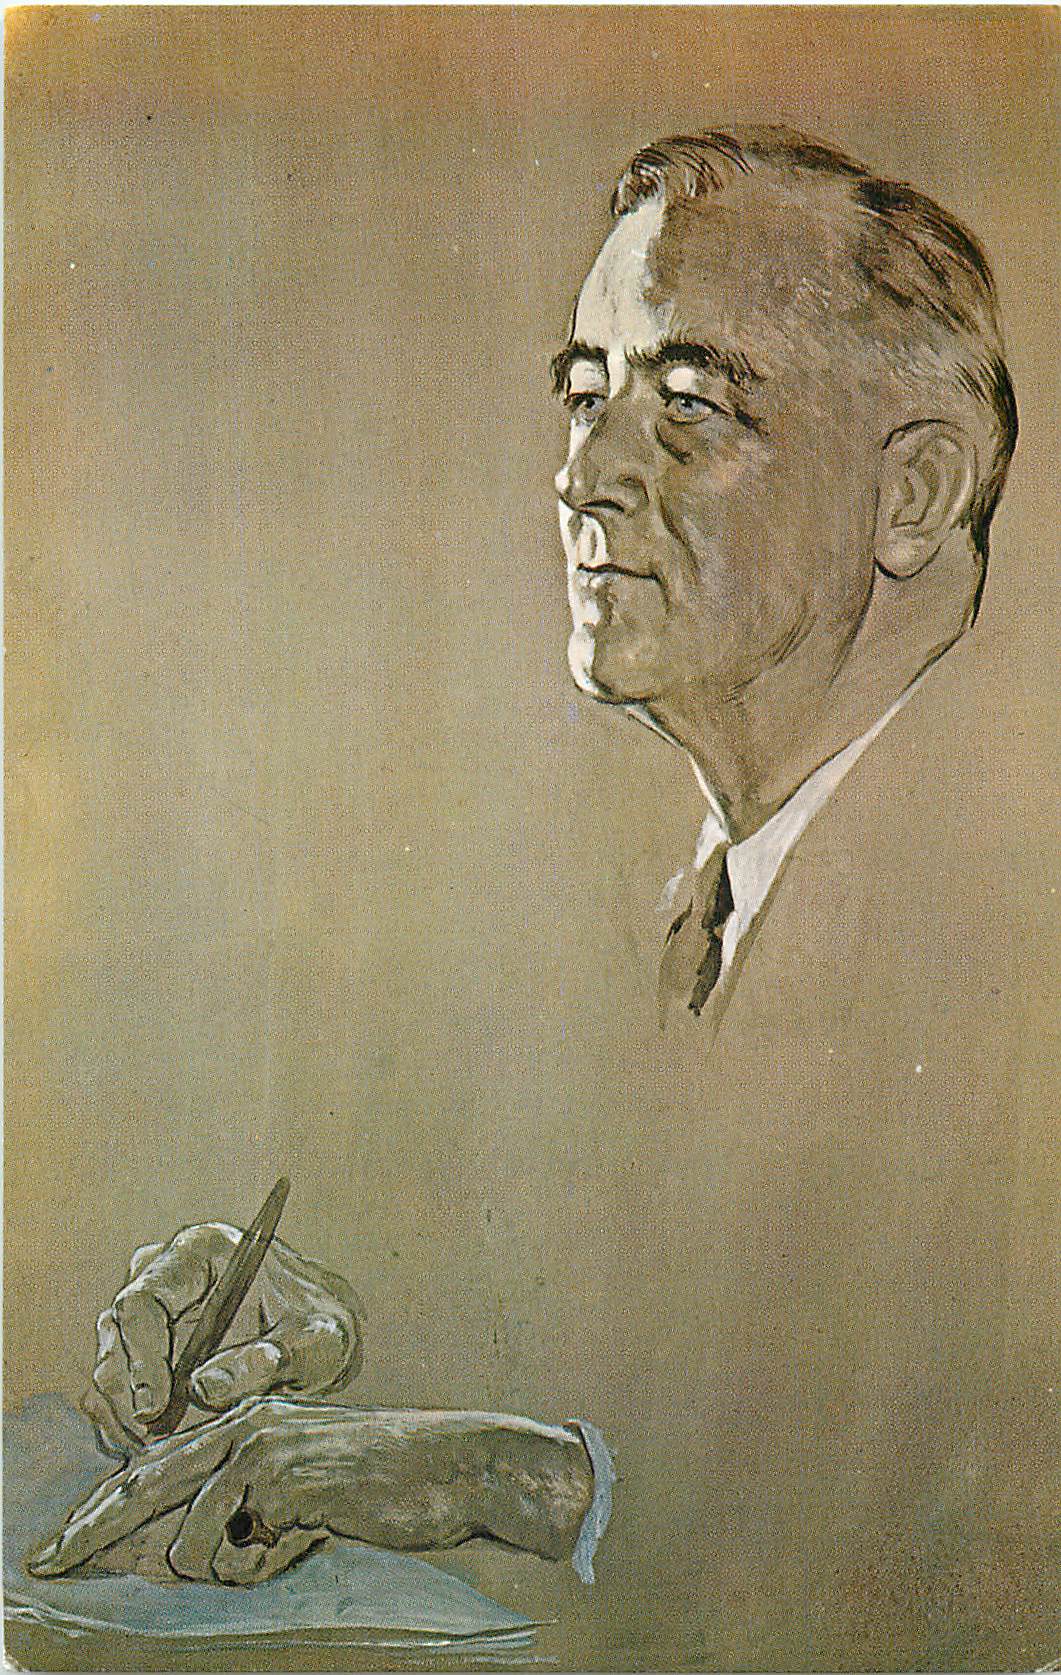 Watercolor Portrait of FDR - by Irena Wiley"